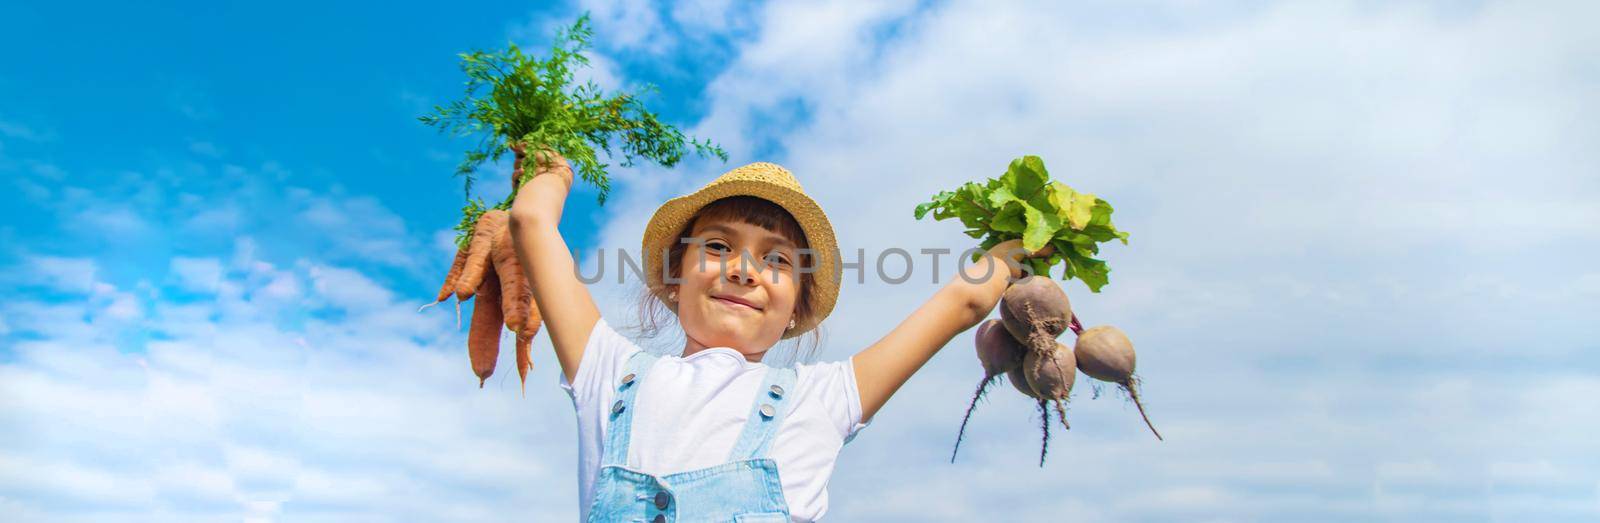 A child with a bunch of beets in the garden. Selective focus. nature. by yanadjana